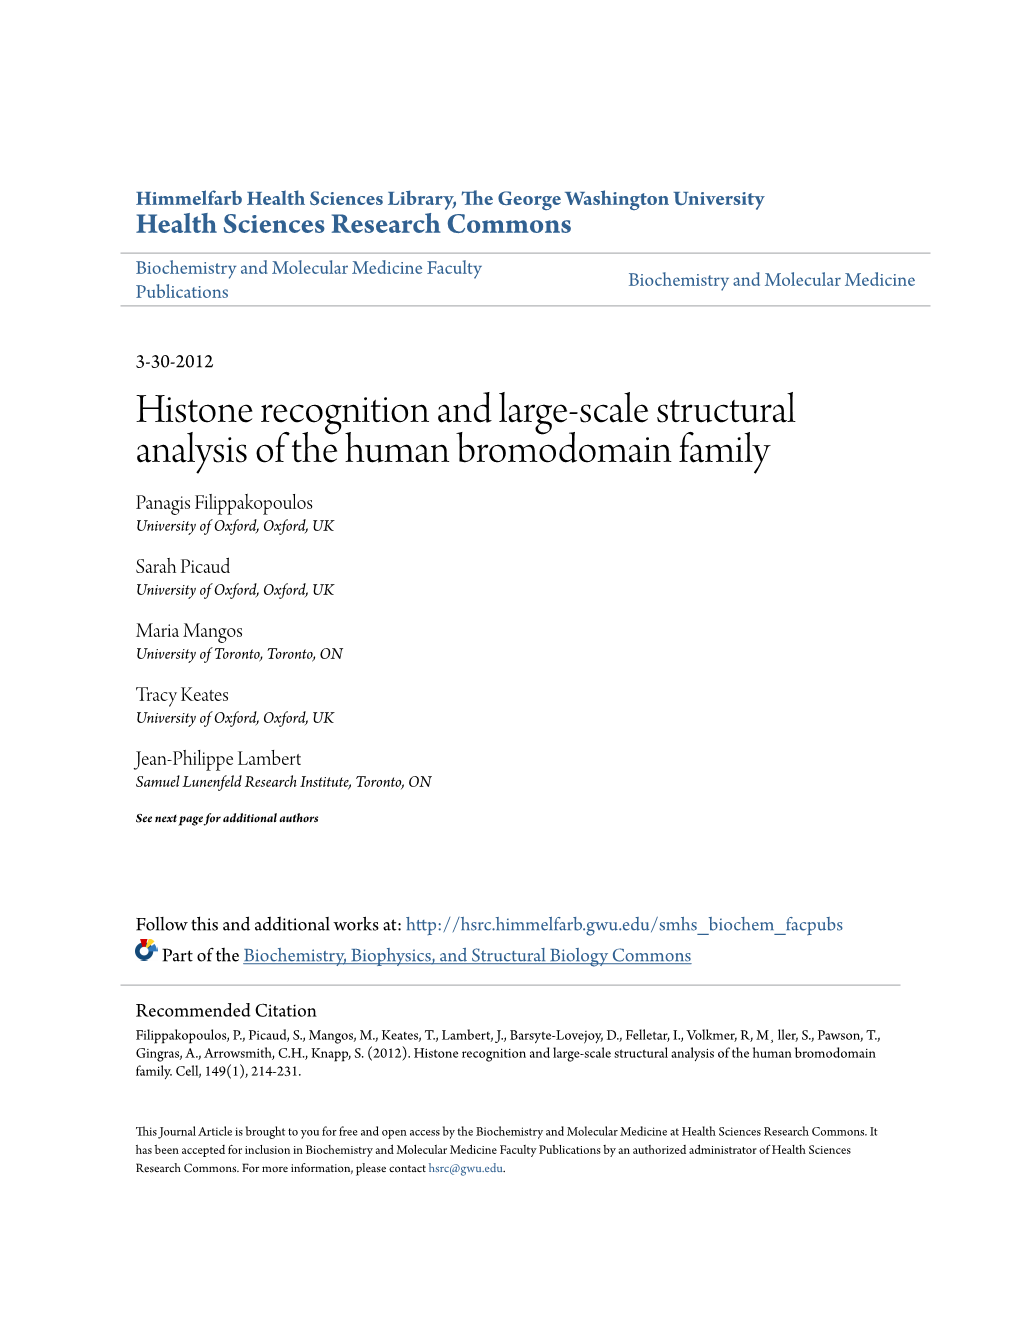 Histone Recognition and Large-Scale Structural Analysis of the Human Bromodomain Family Panagis Filippakopoulos University of Oxford, Oxford, UK